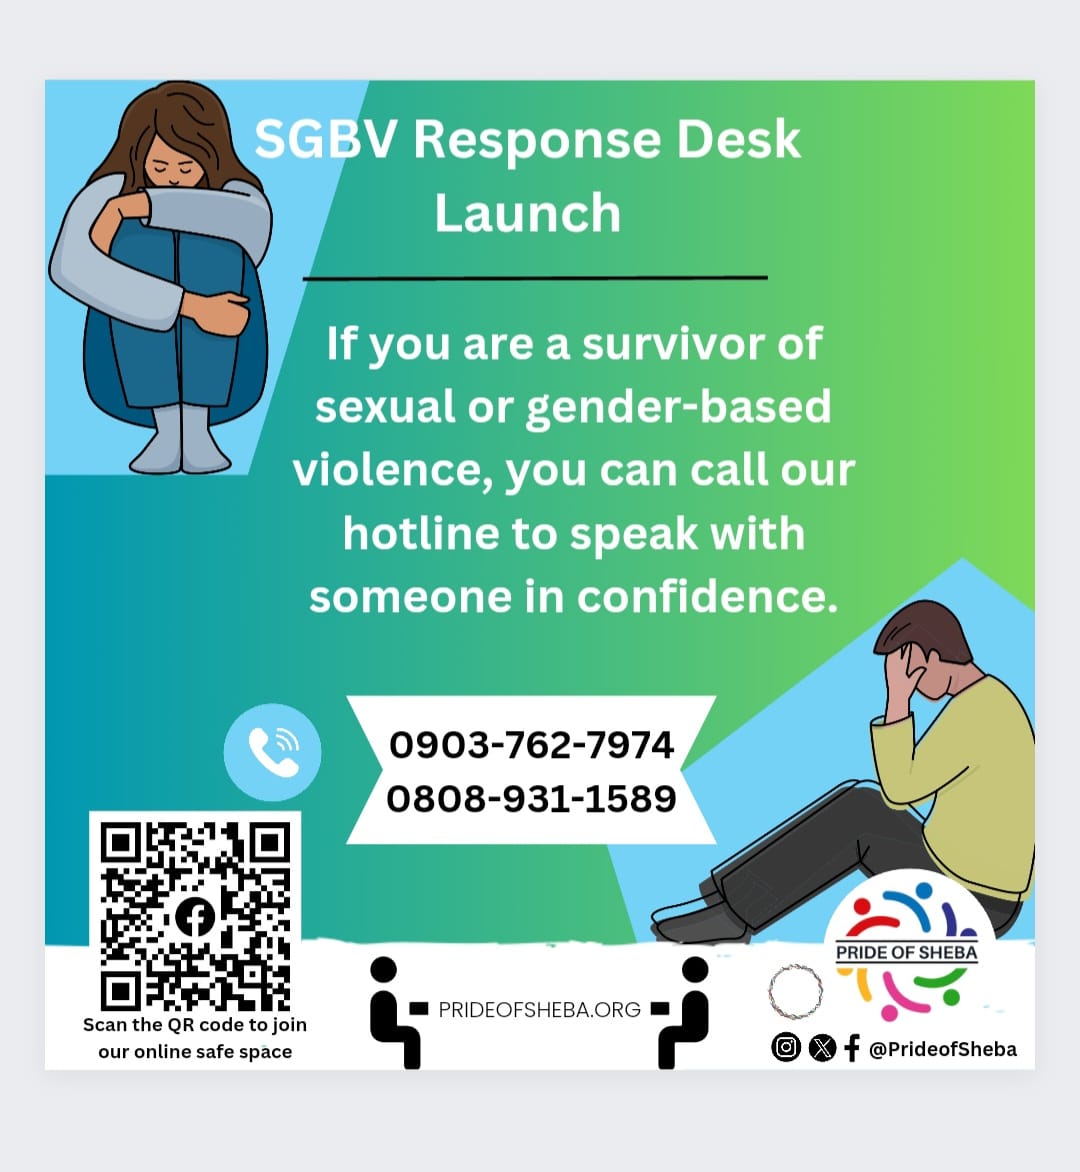 🔗 Introducing our SGBV Response Desk! 🎉🌟

#Prideofsheba #SGBVResponse #BreakTheSilence #SupportSurvivors #YouAreNotAlone #SpeakOutTogether